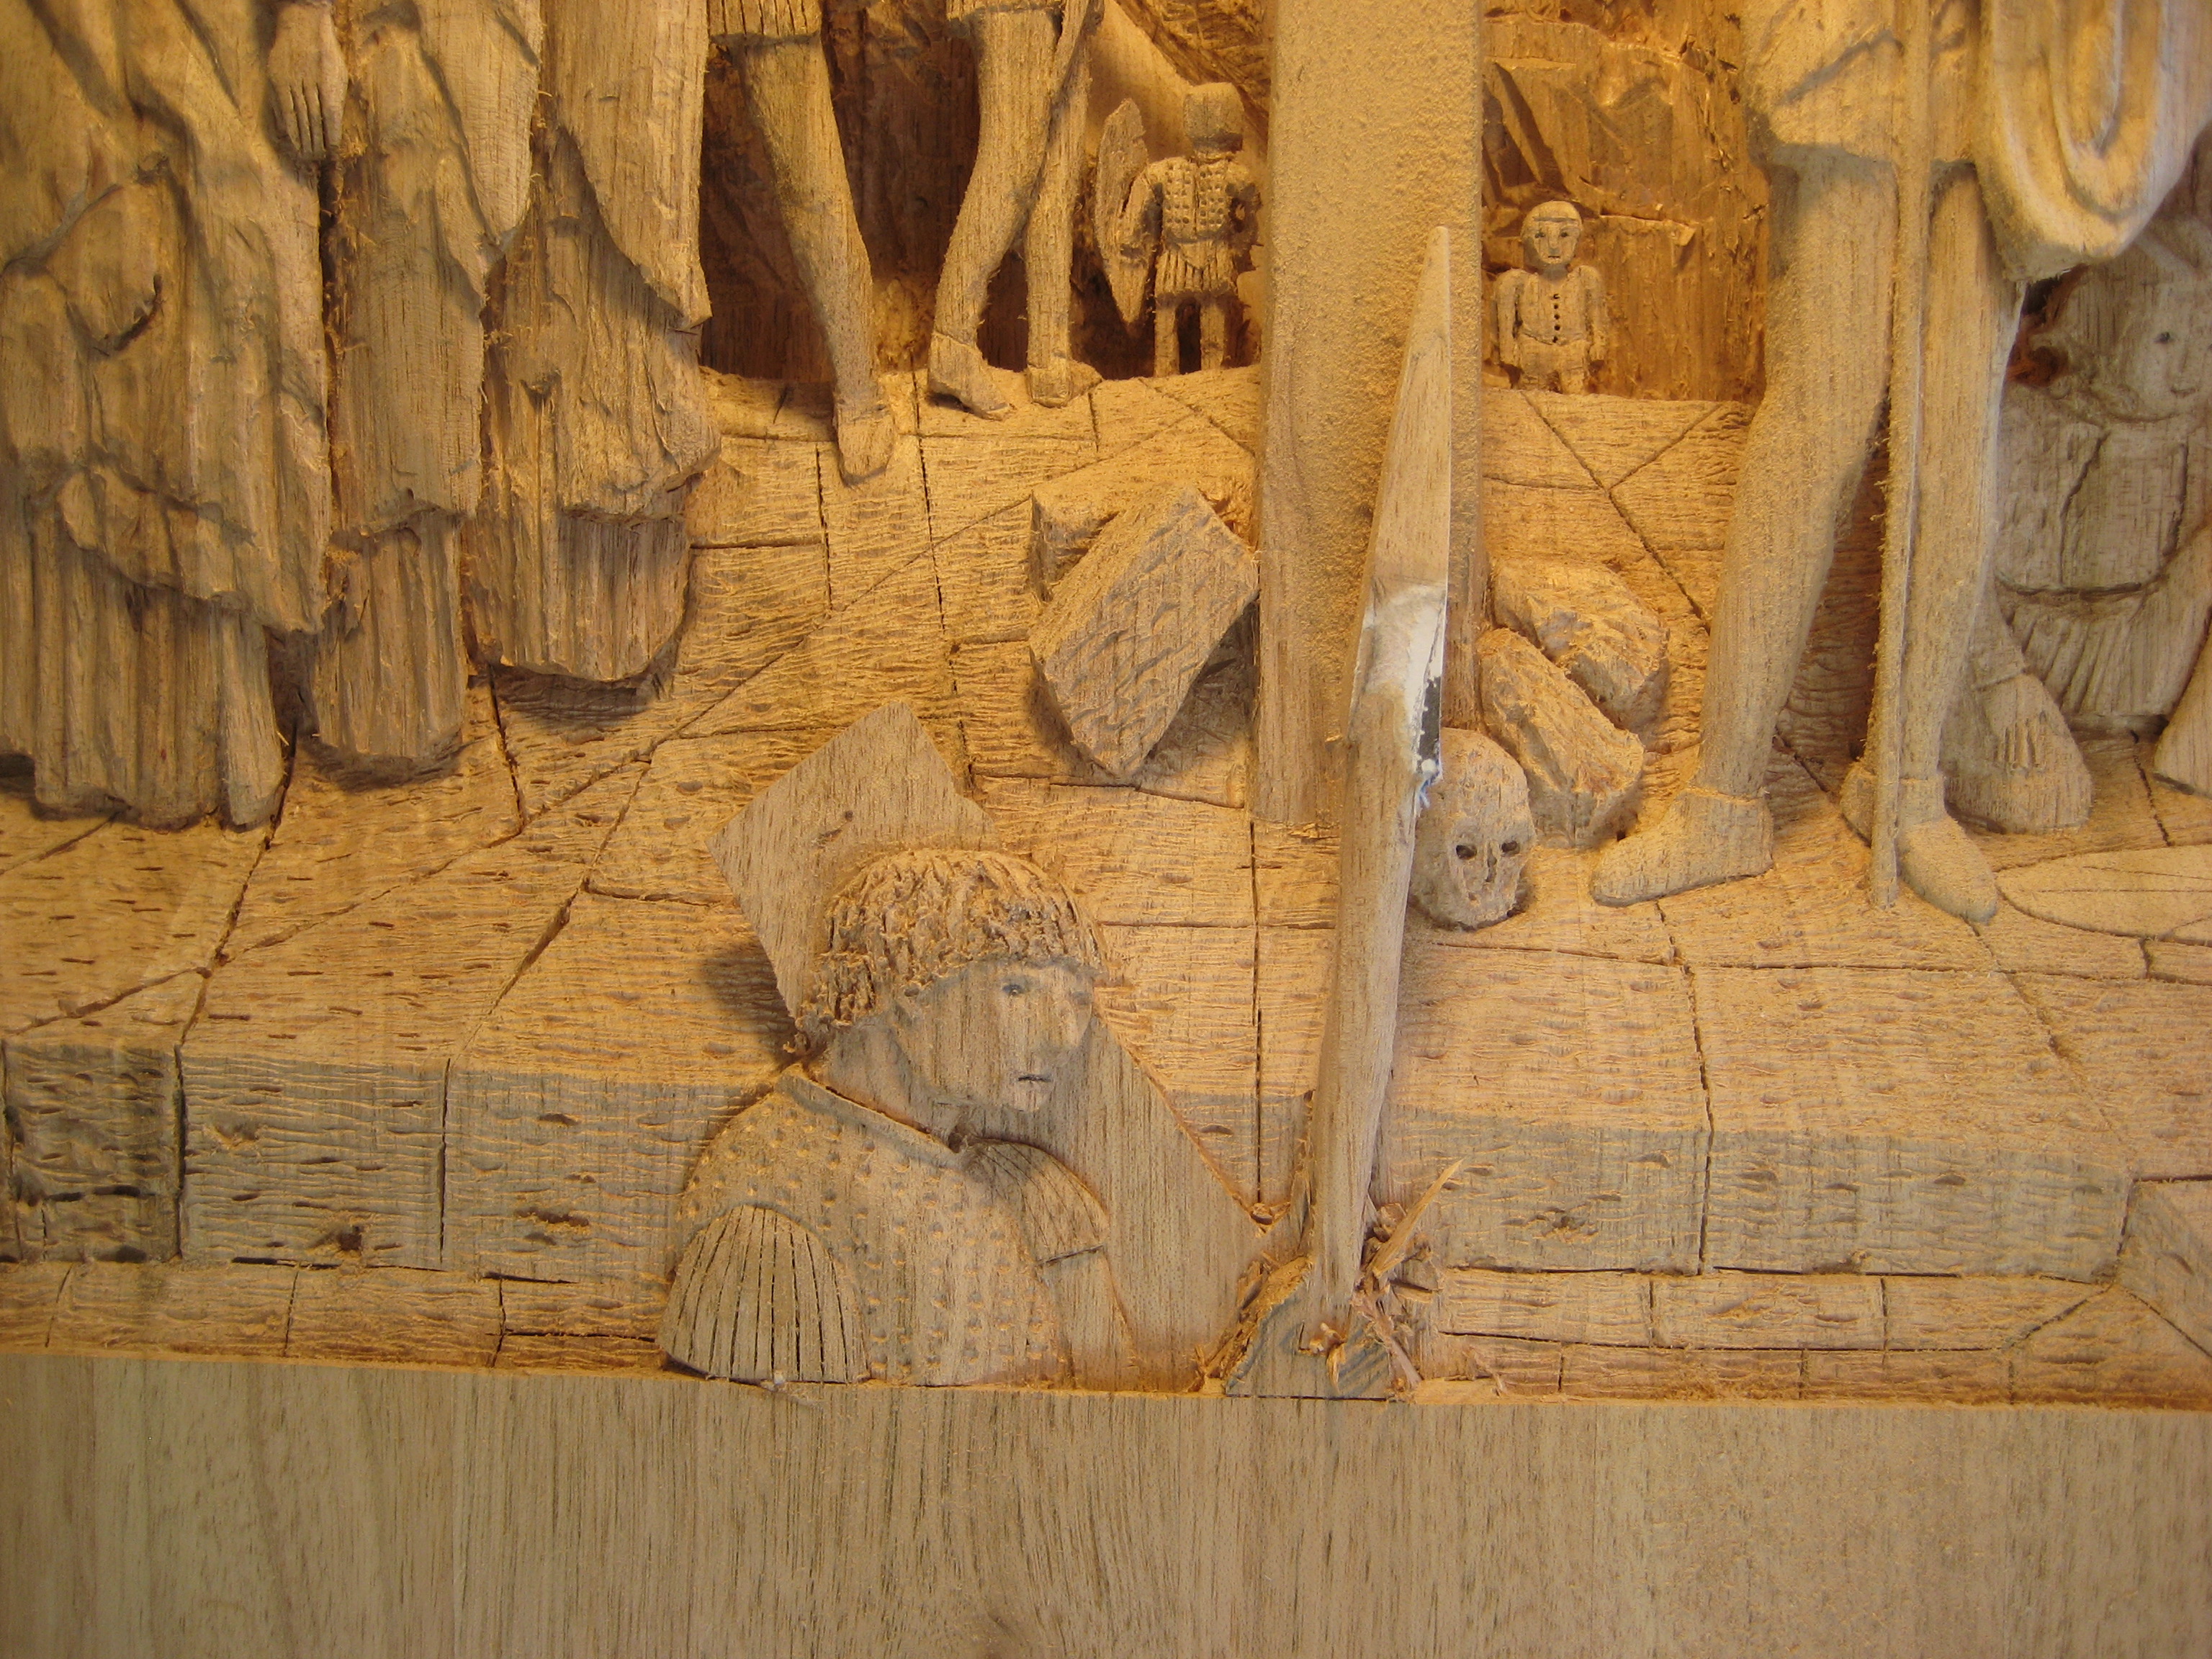 Here, Weaver's doing the finishing detail on his "Crucifixion" carving. Note the depth of the relief, which is seen in all his work.